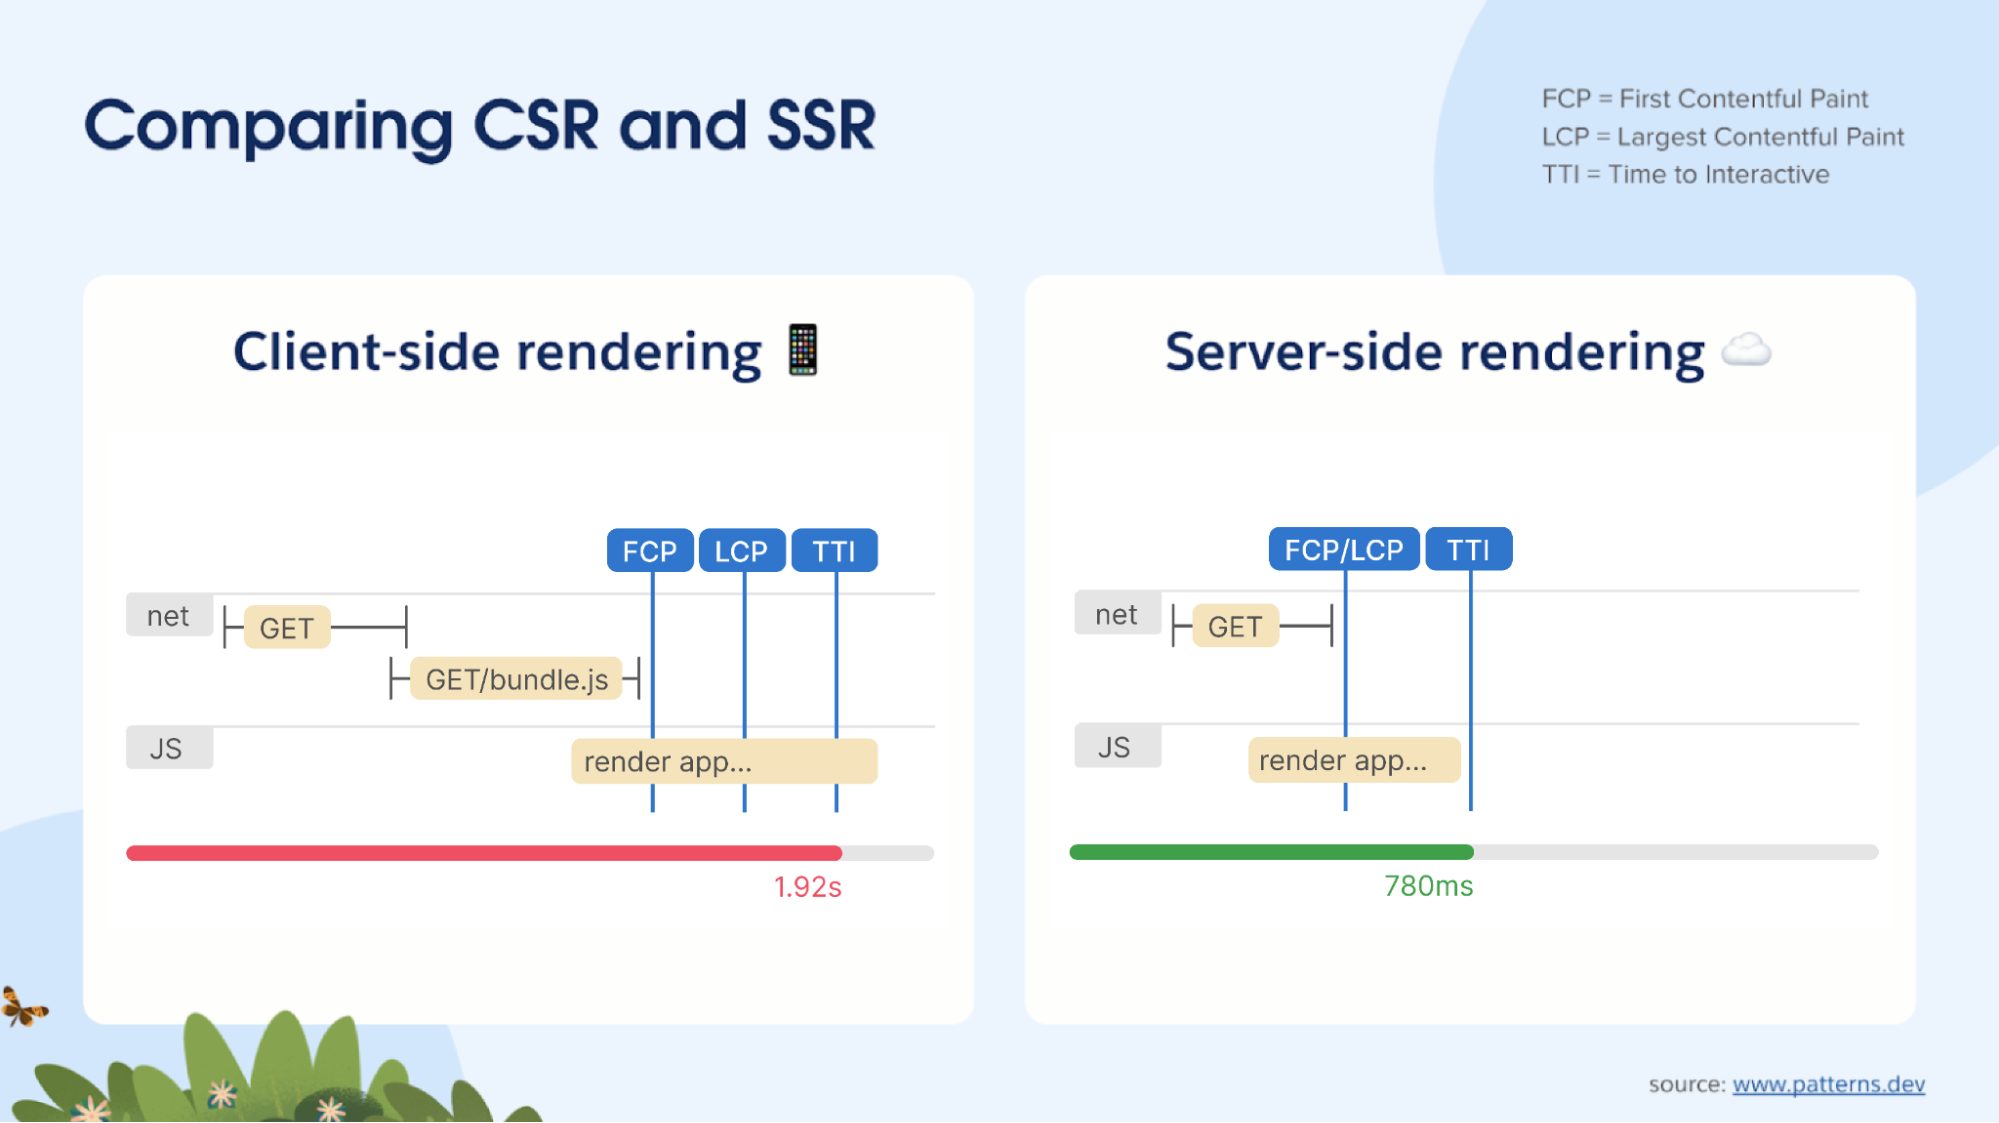 Diagram comparing the First Contentful Paint (FCP), Largest Contentful Paint (LCP), and Time to Interactive (TTI) of client-side and server-side rendering processes.